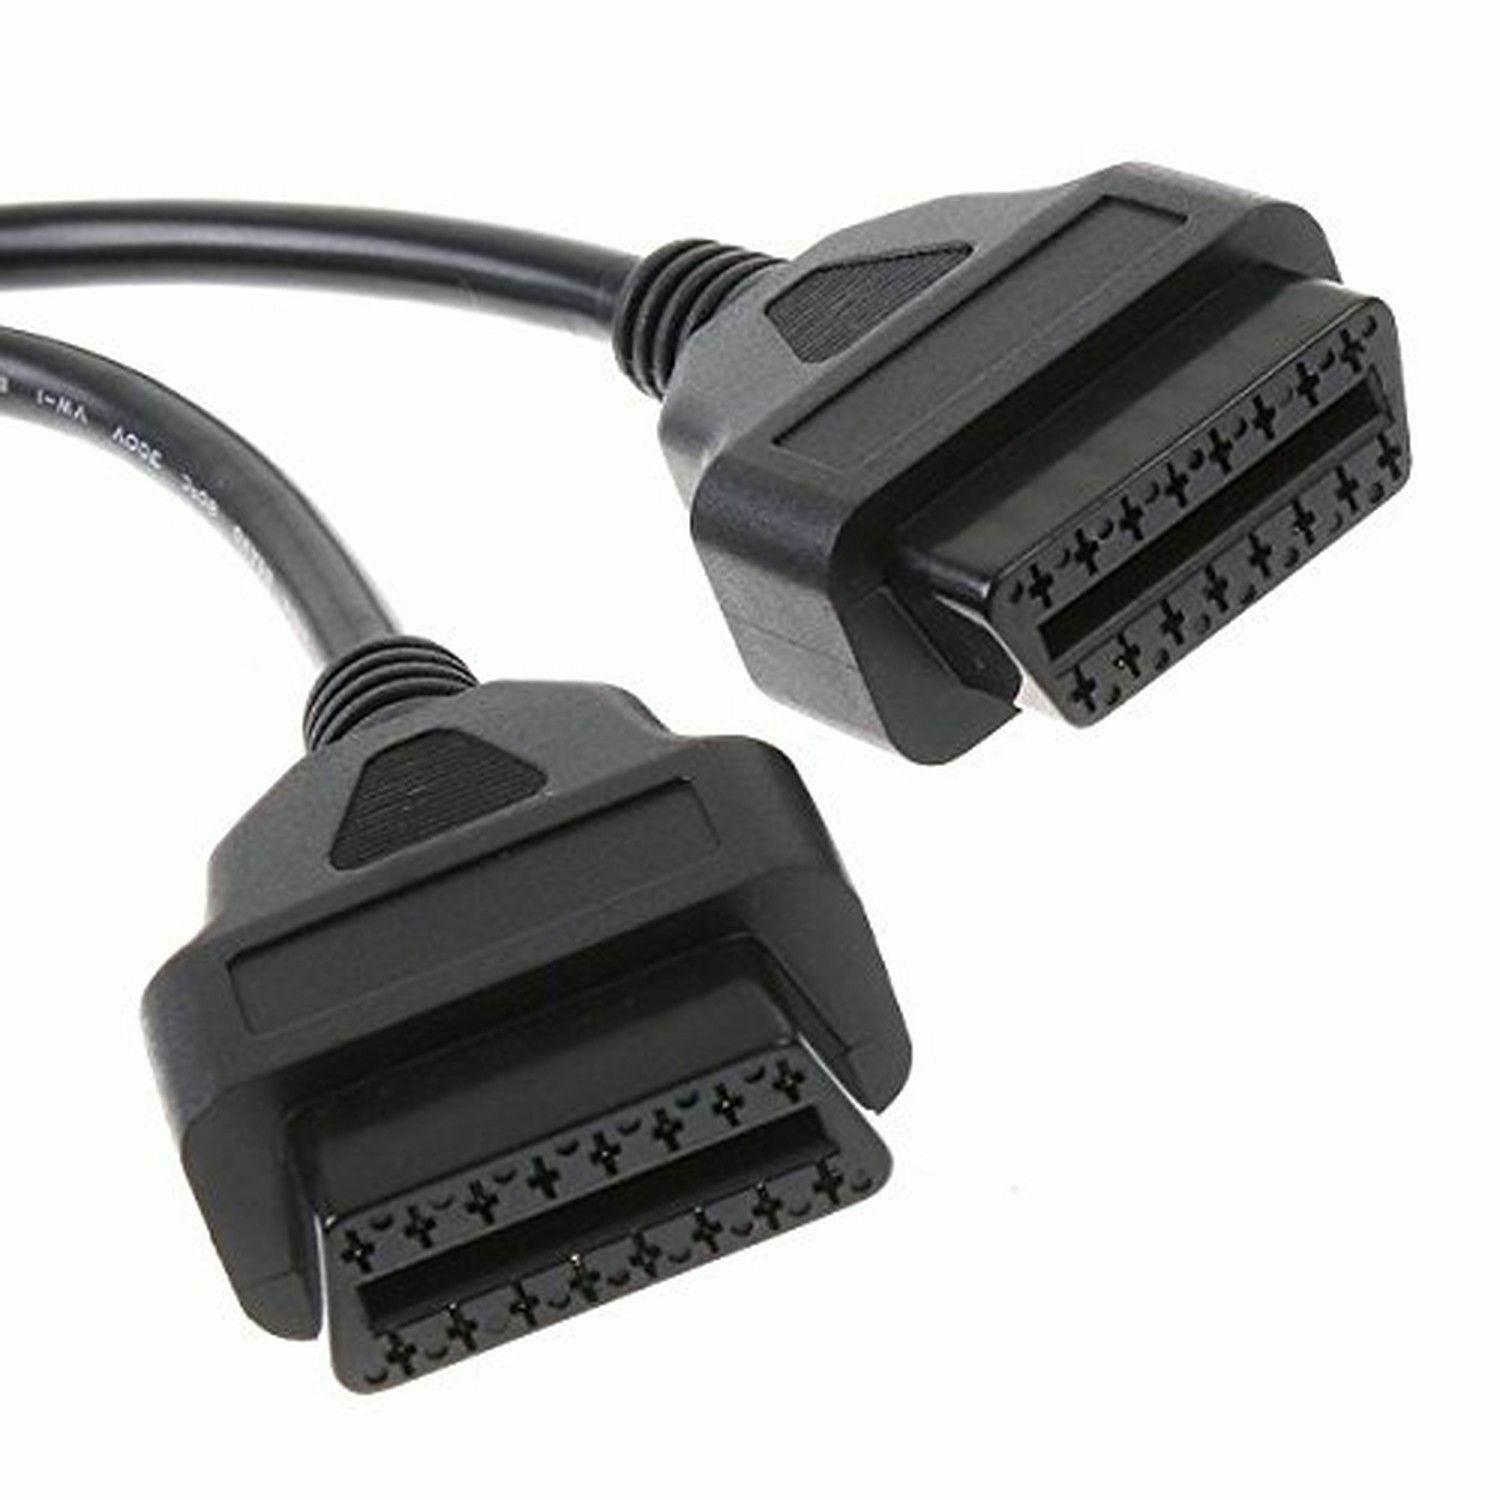 2x For 3 Pin Alfa To 16 Pin Obdii Obd2 Obd-ii Connector Adapter